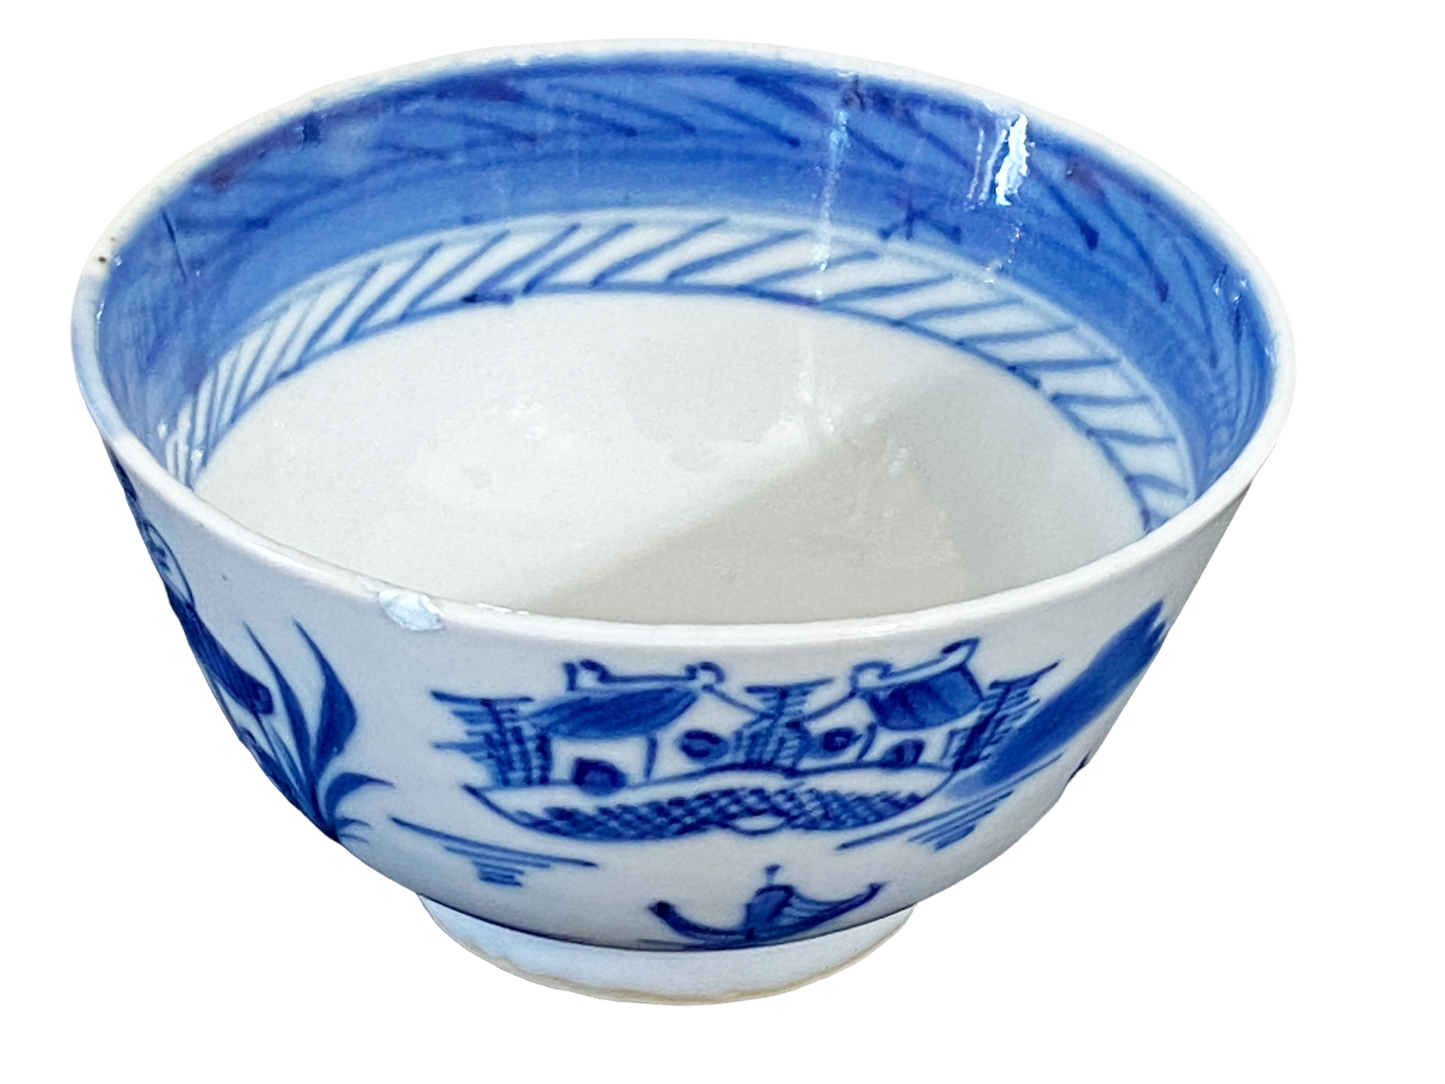 19th C Chinese Canton Blue and White Porcelain Pagoda Motif Bowl 3.75" D